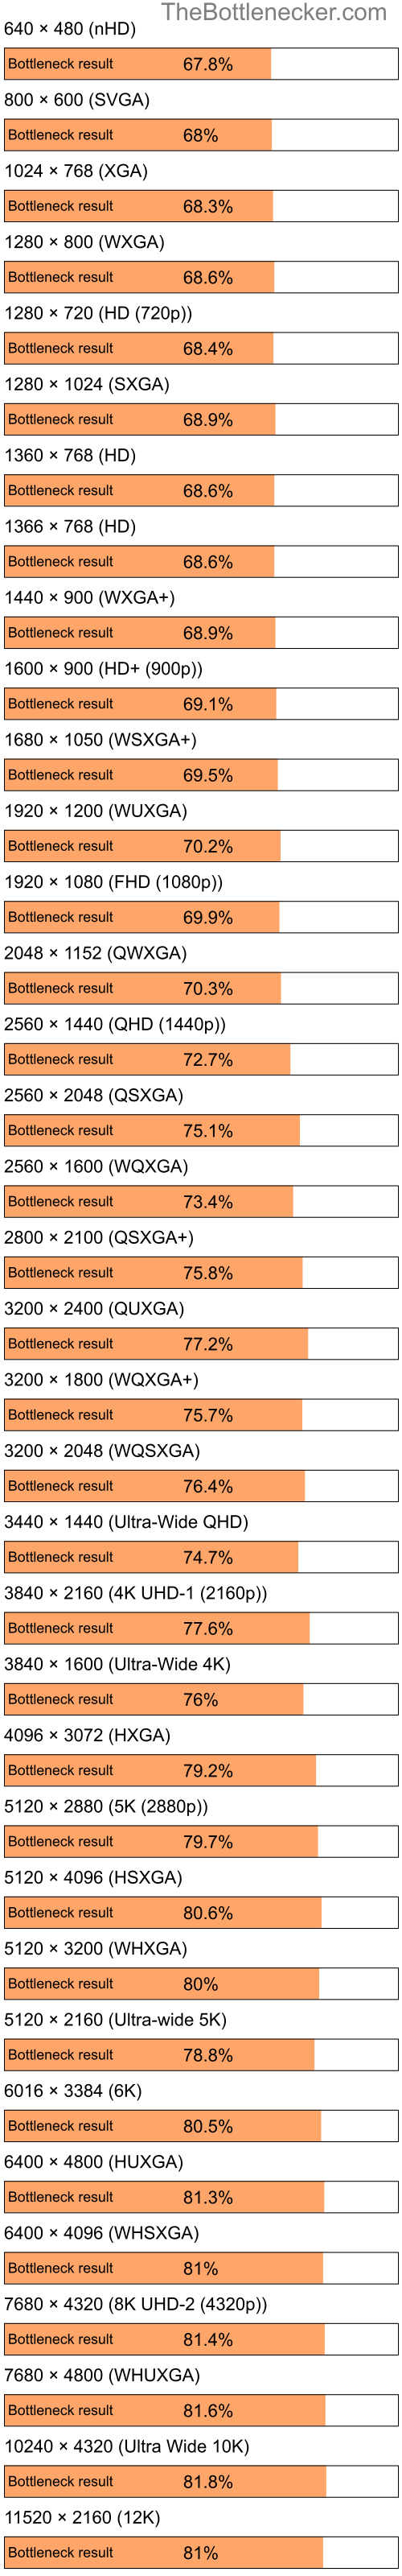 Bottleneck results by resolution for Intel Celeron and AMD Mobility Radeon HD 3430 in Graphic Card Intense Tasks